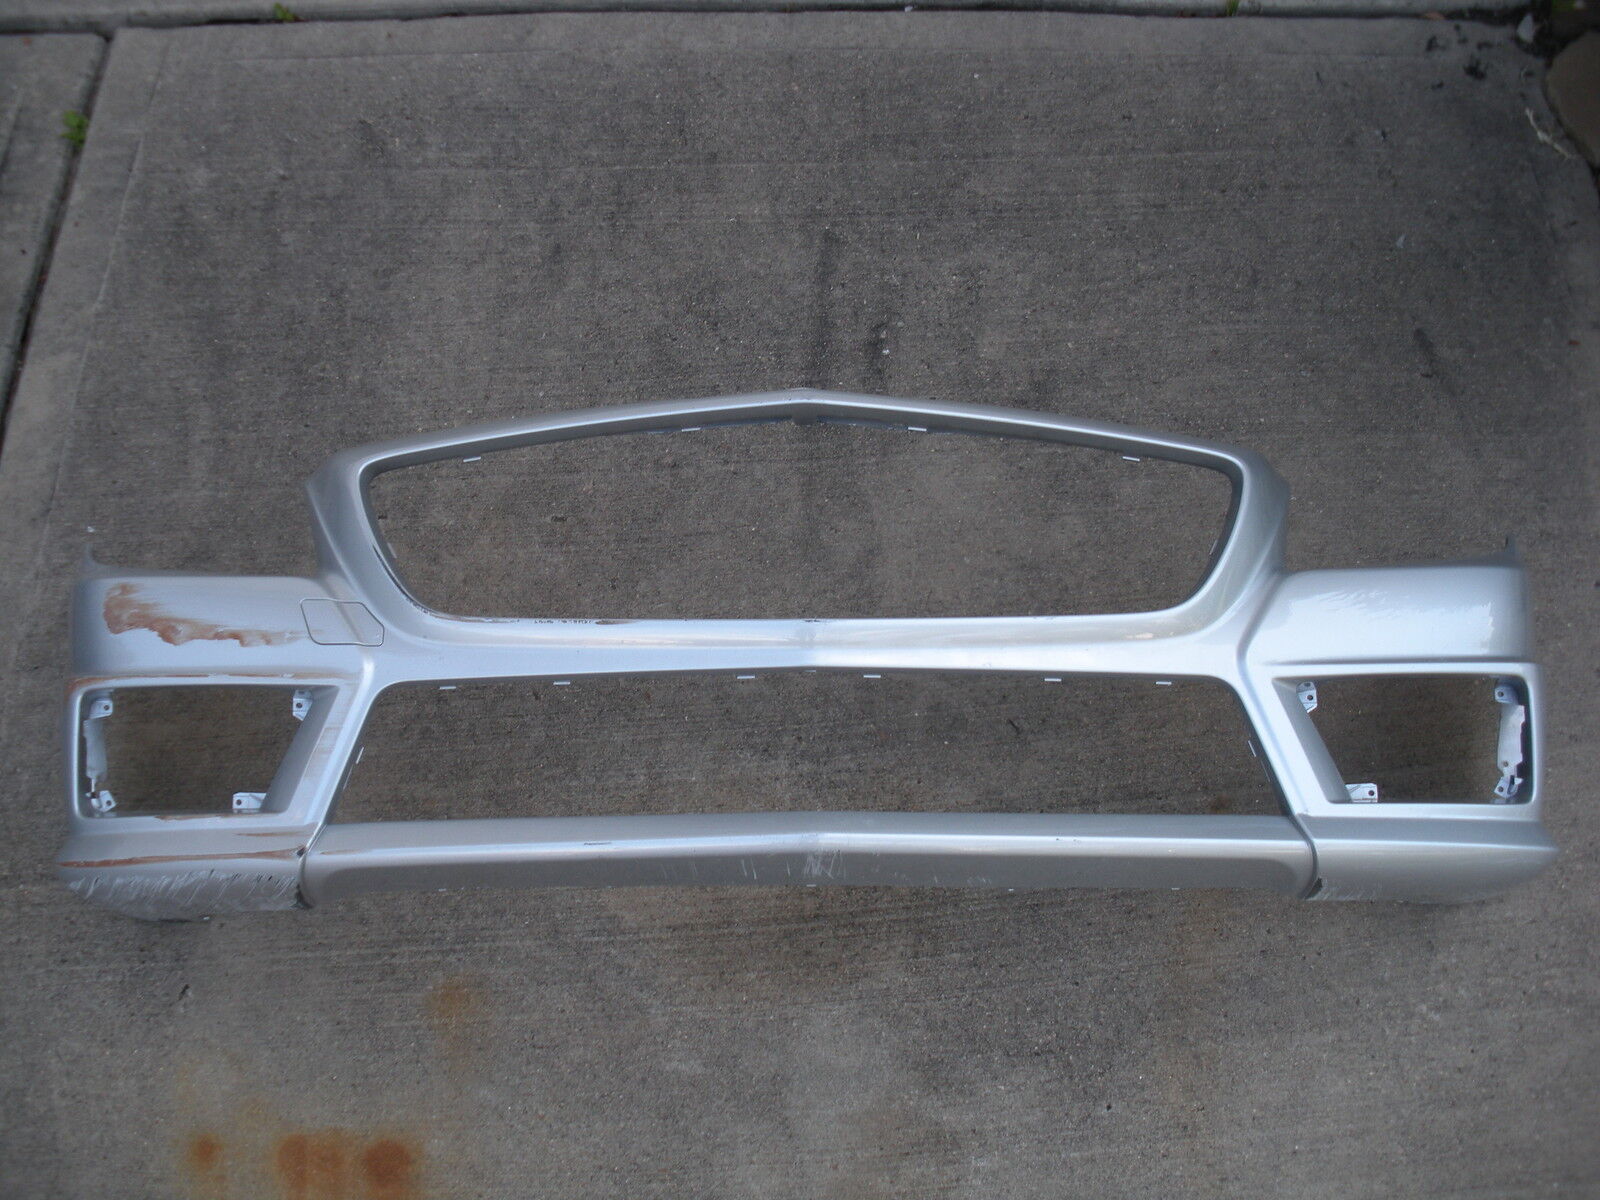 Mercedes SL63 AMG Front Bumper Cover 2013 2014  OEM No Parktronic - No Tears